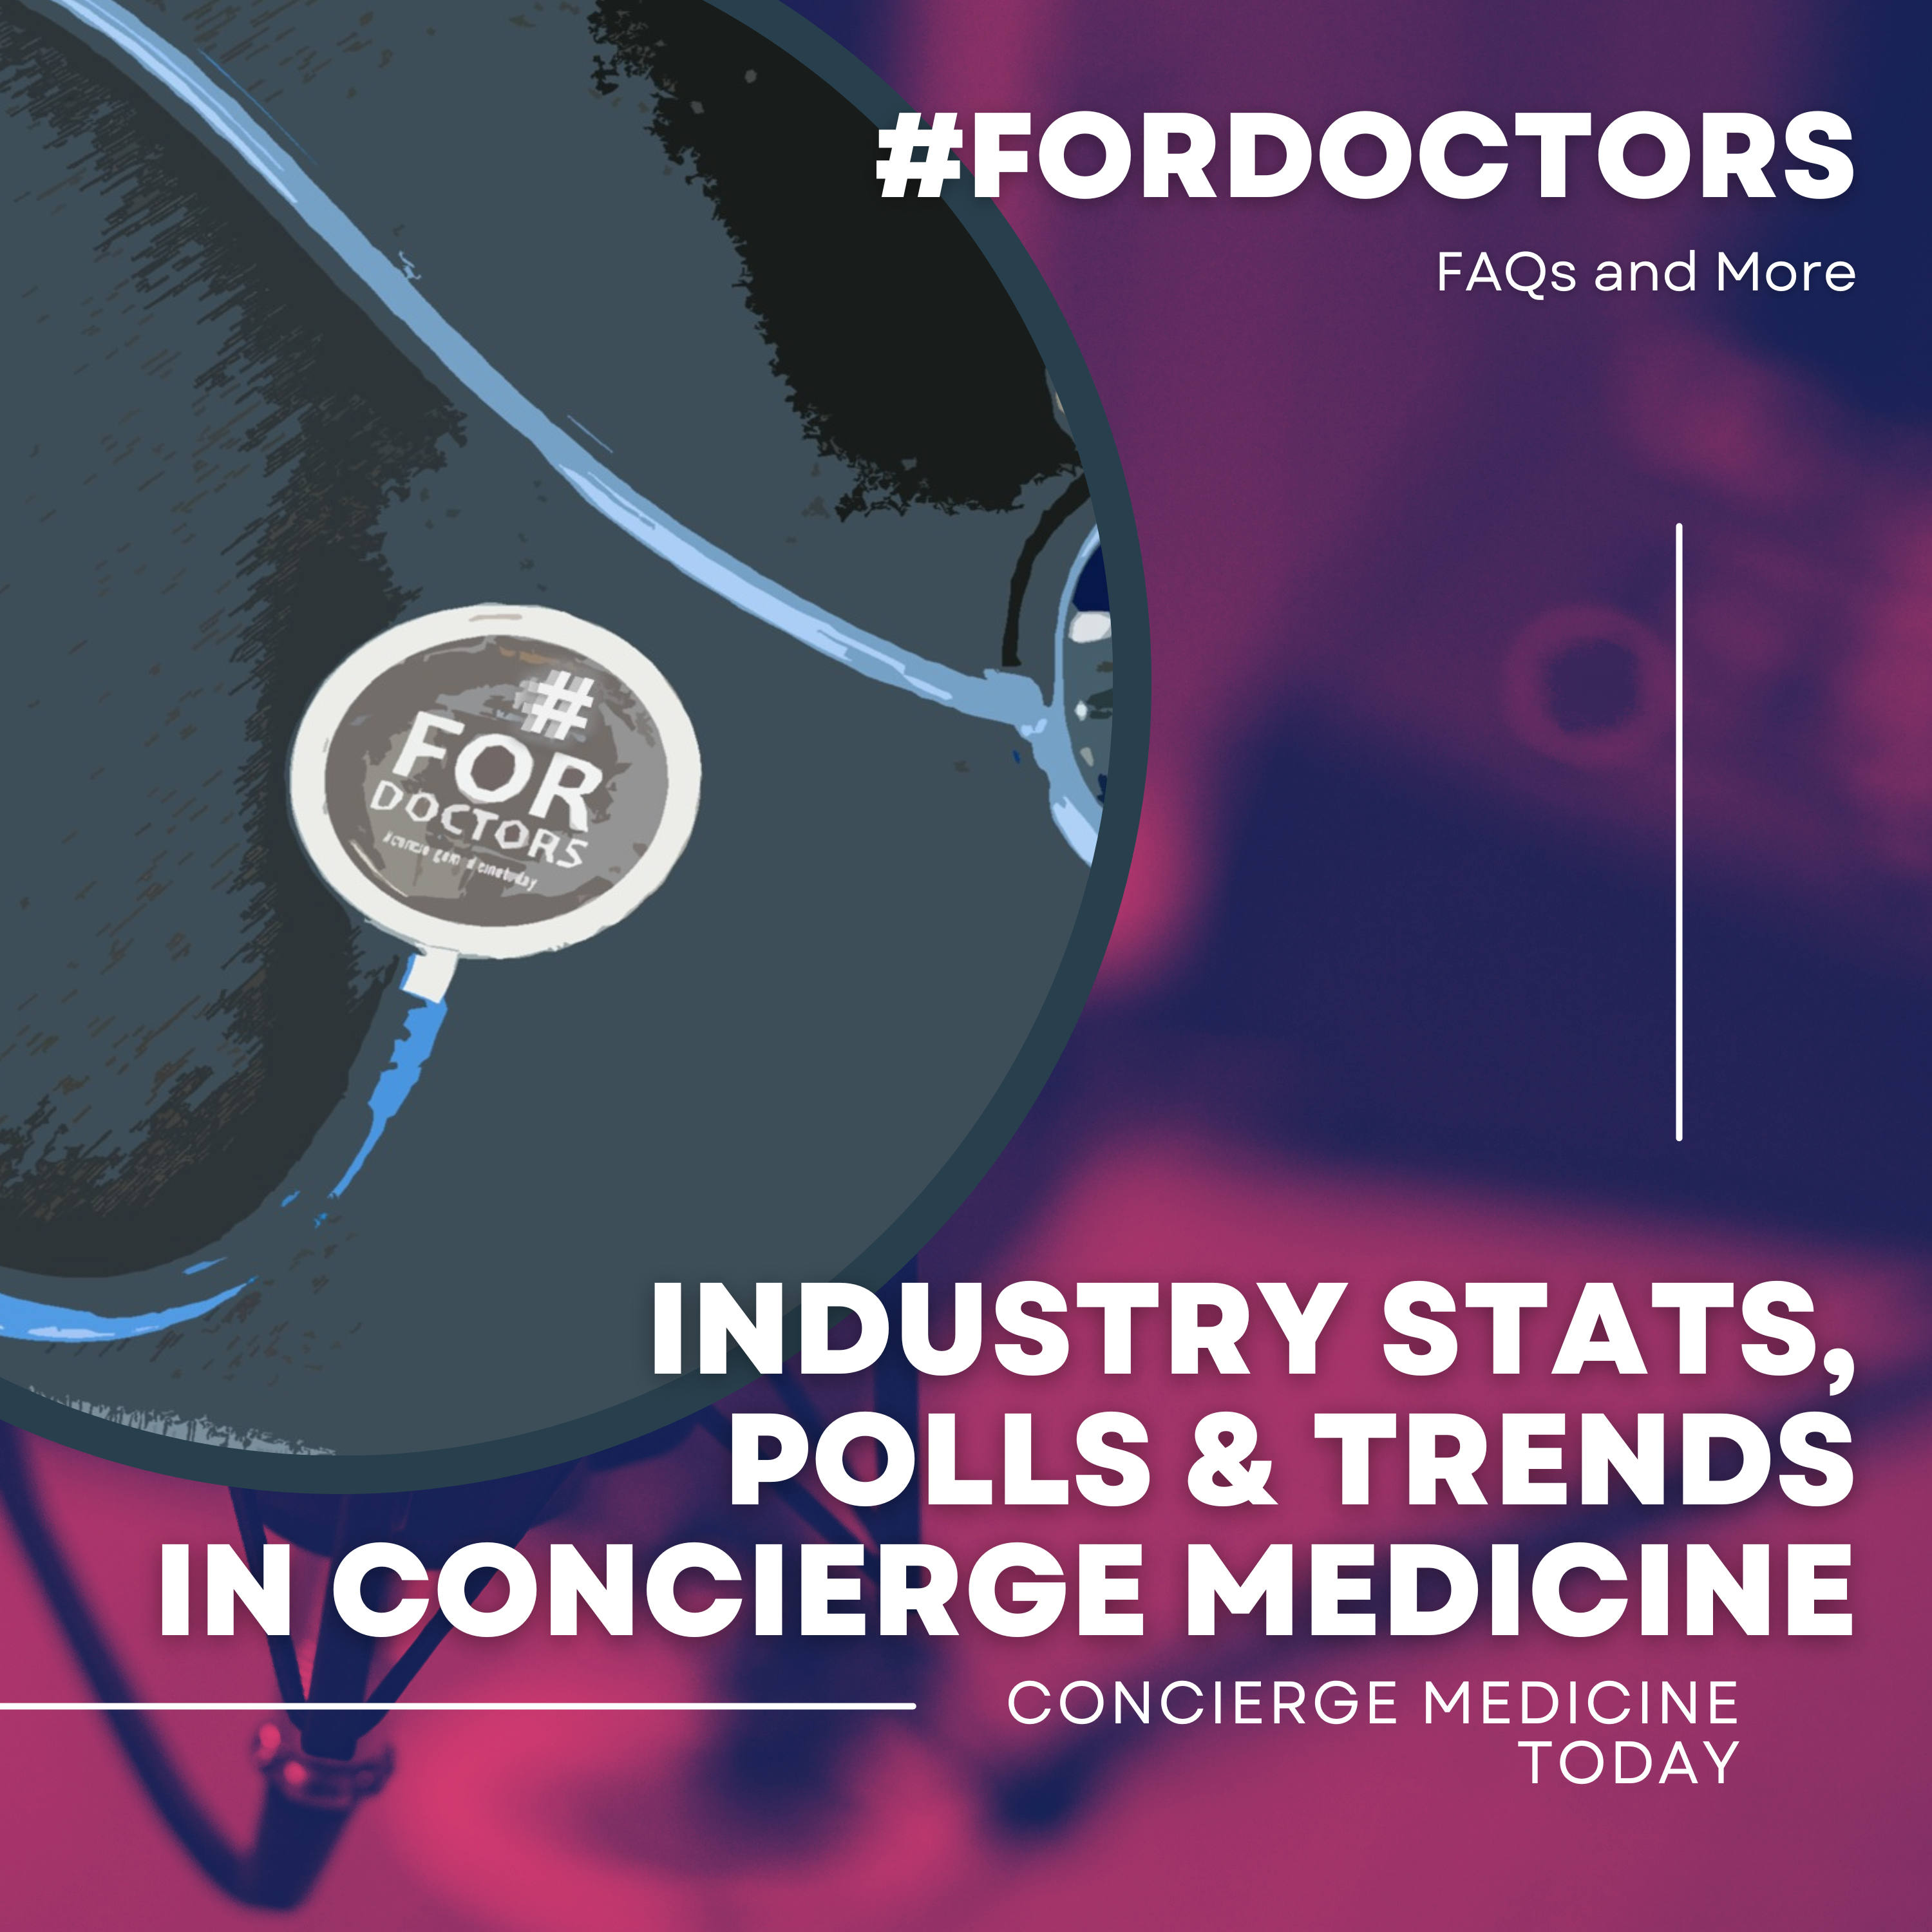 Popular Trends and Polls In 2022 About Concierge Care